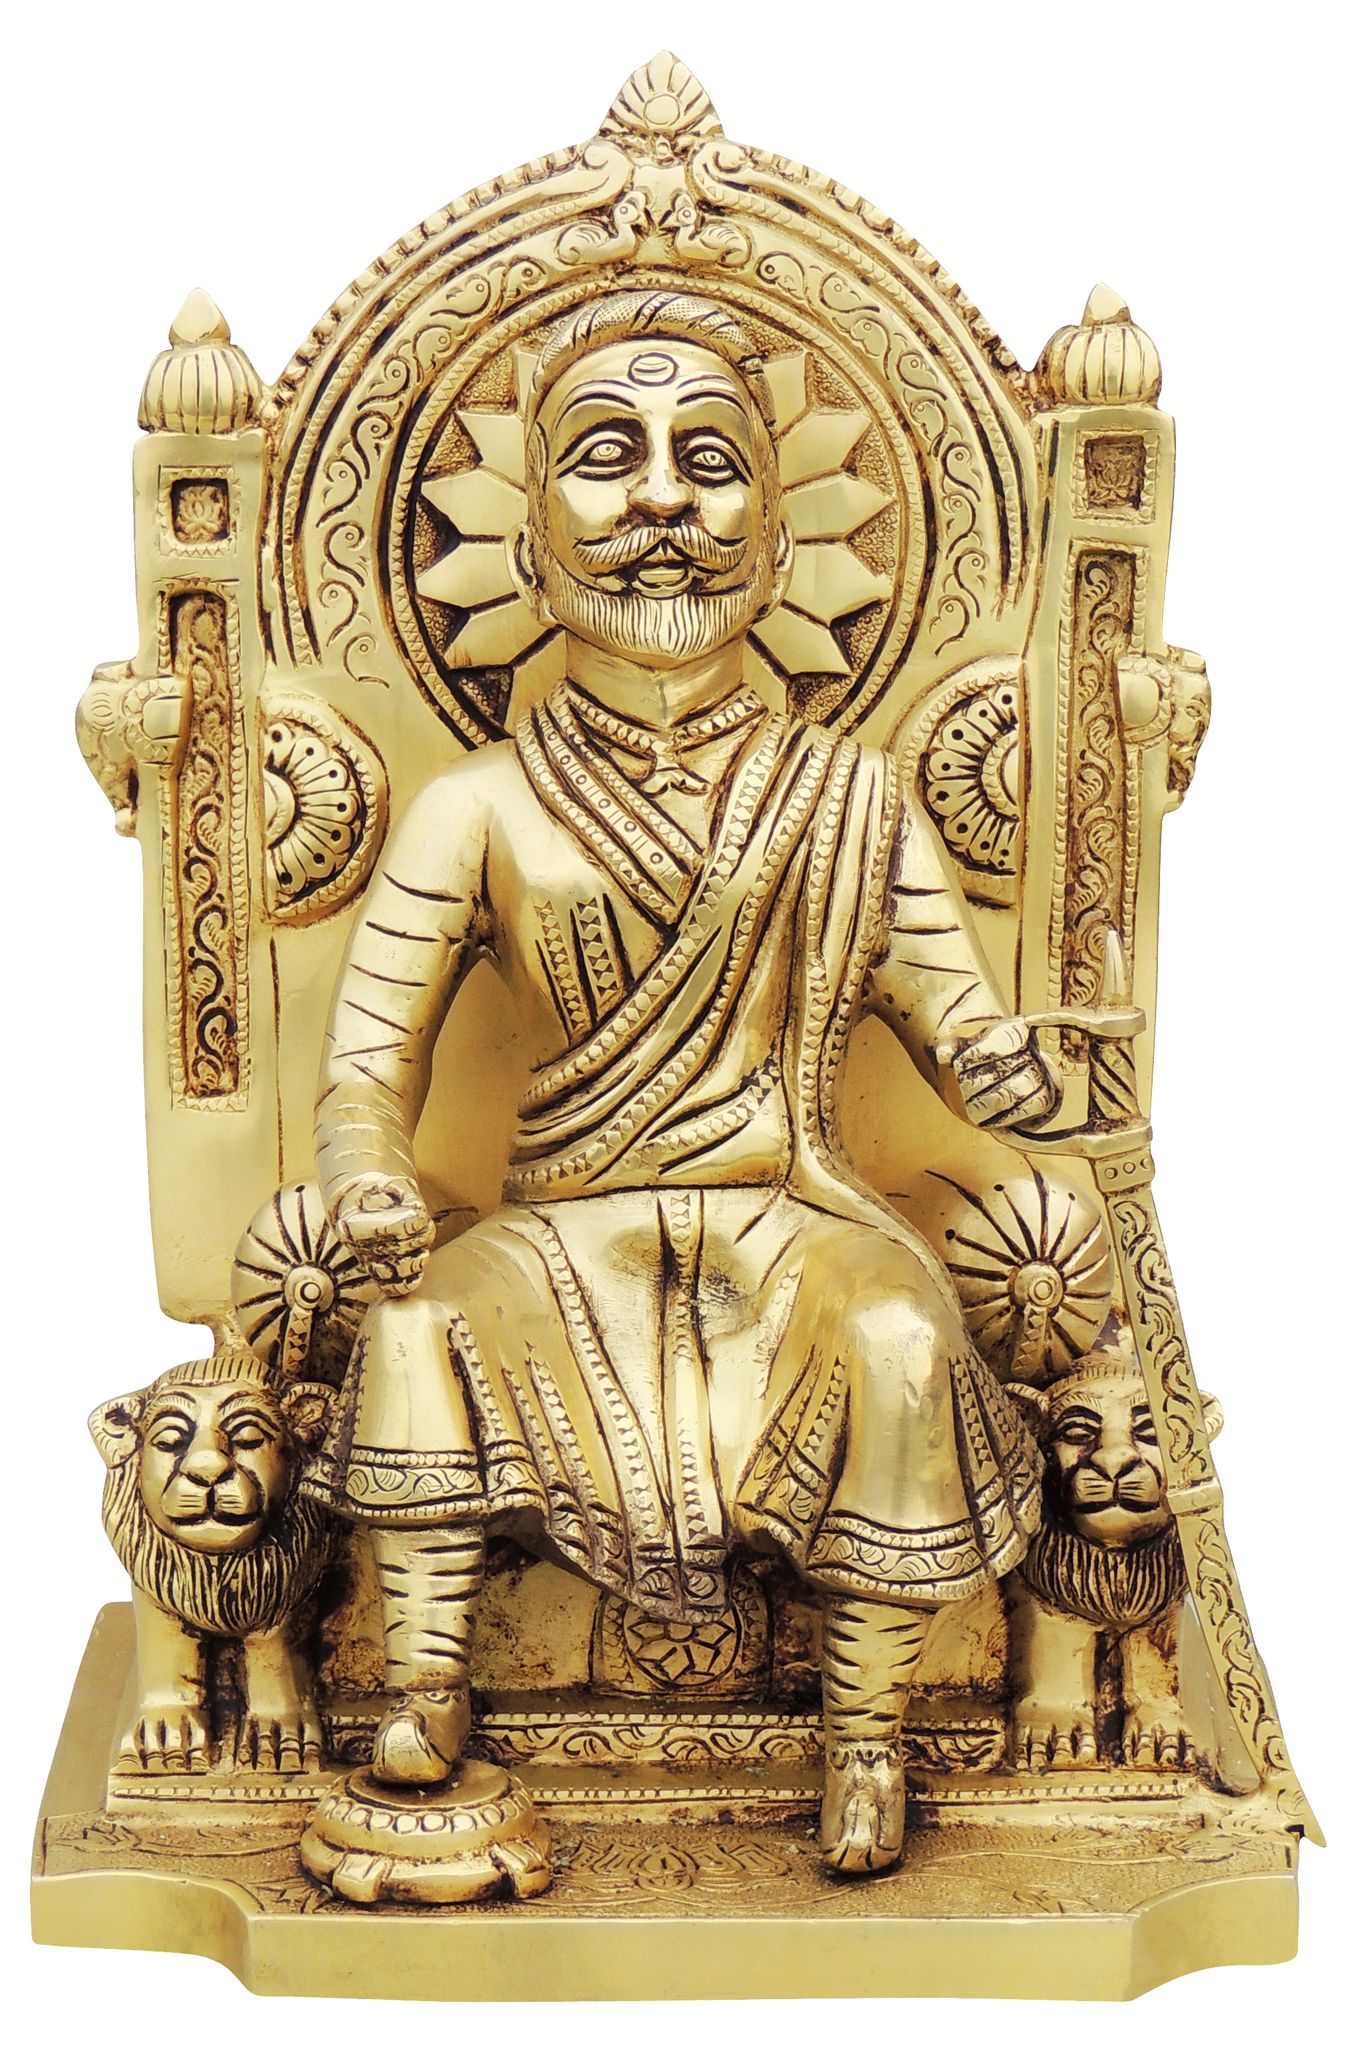 12 X 10 X 18 Inch Brass Statues, For Decoration at Rs 15000/piece in Pune